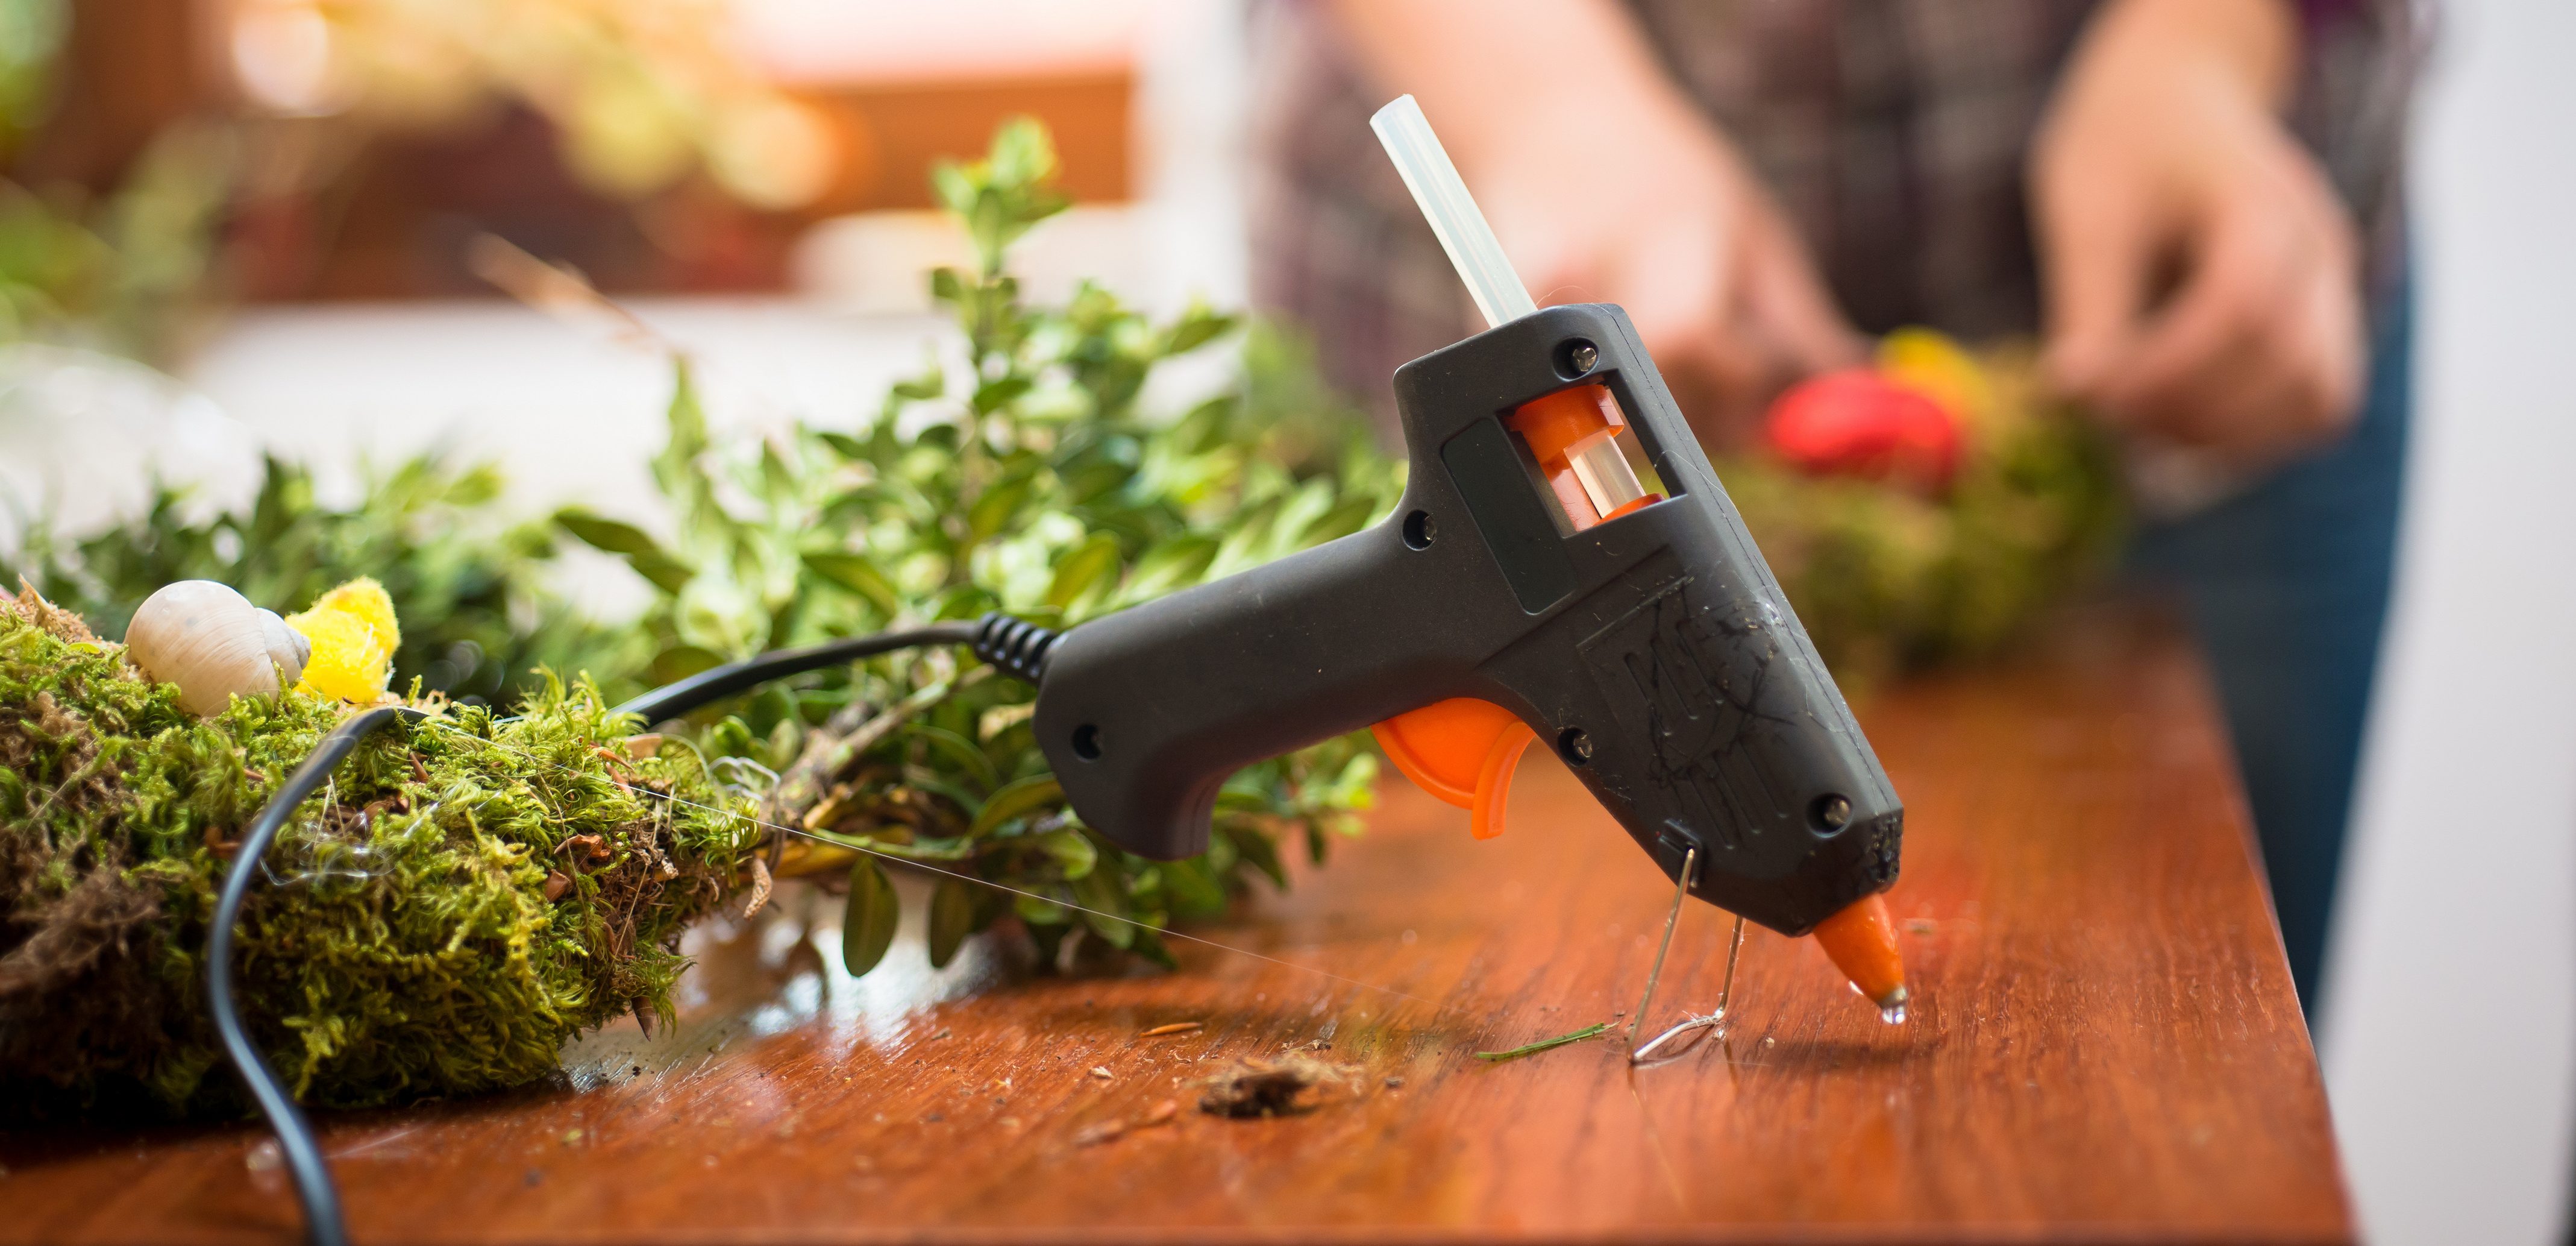 how to make cordless glue gun - 2020 inventions 